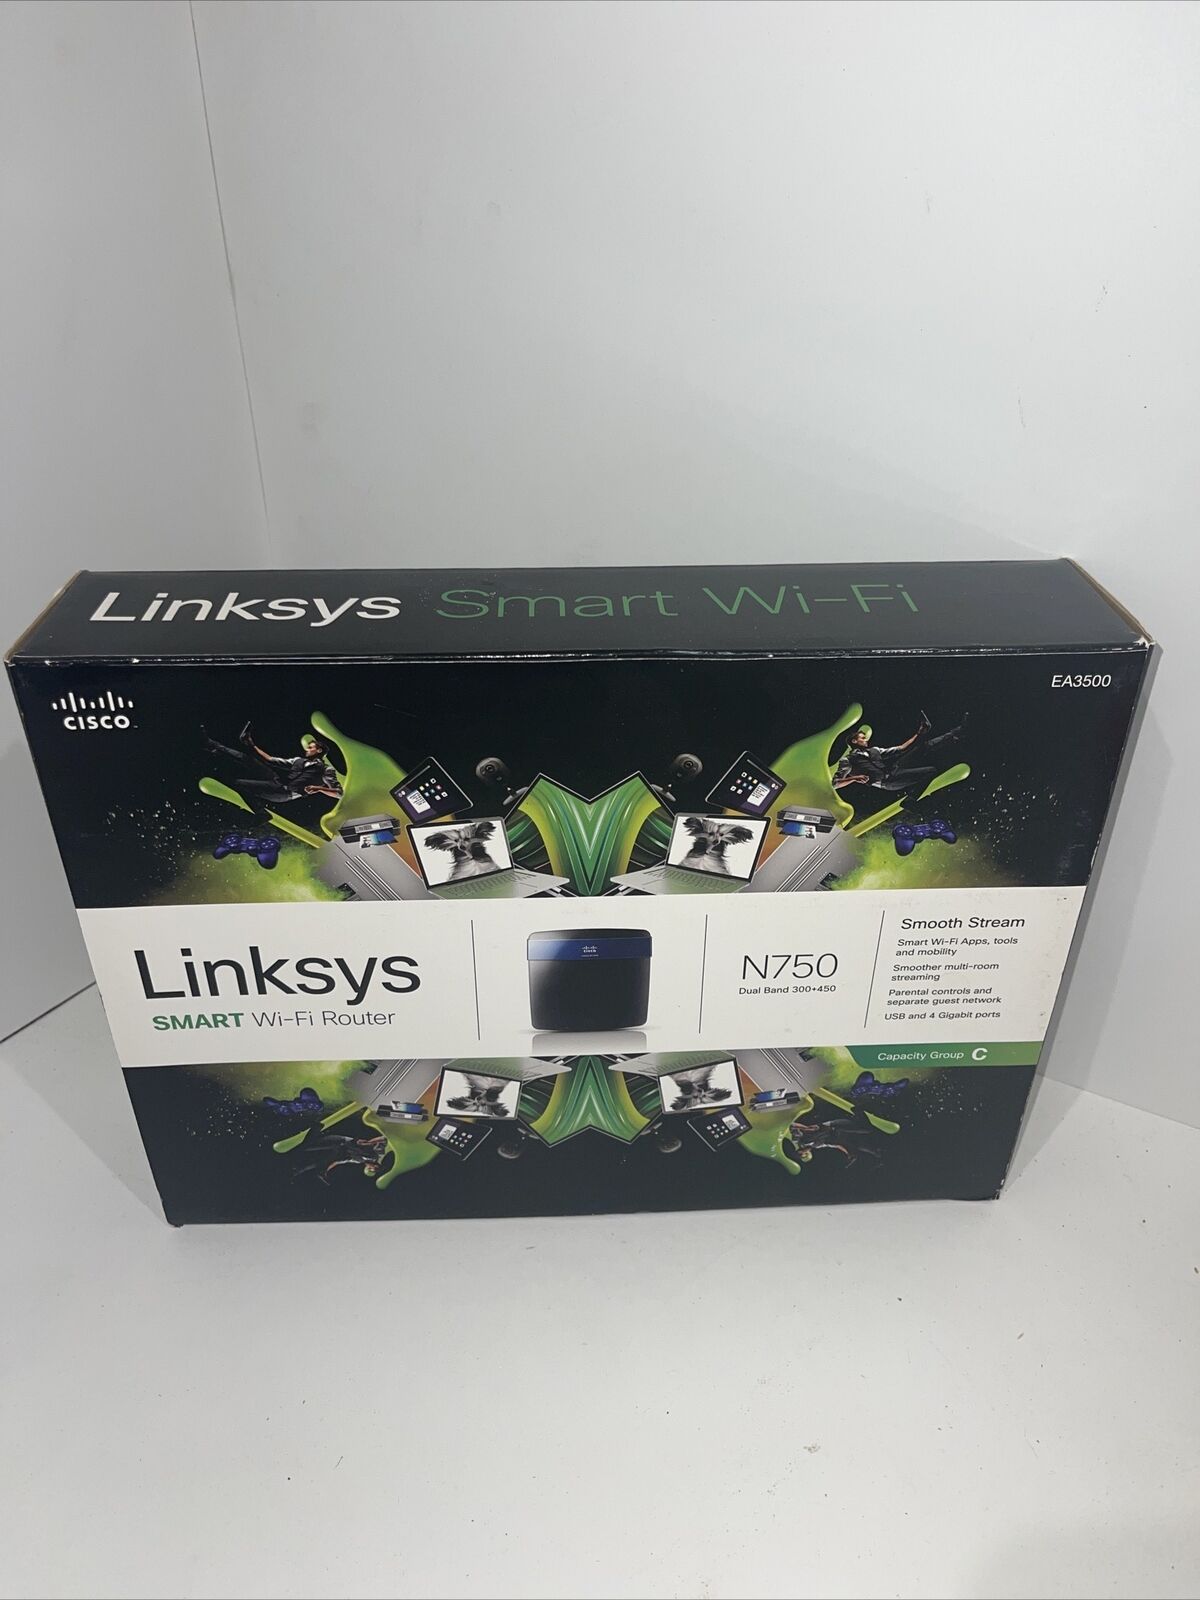 Linksys N750 EA3500 Dual Band Wireless N Router Cisco 2.4 + 5GHz 300 + 450Mbps